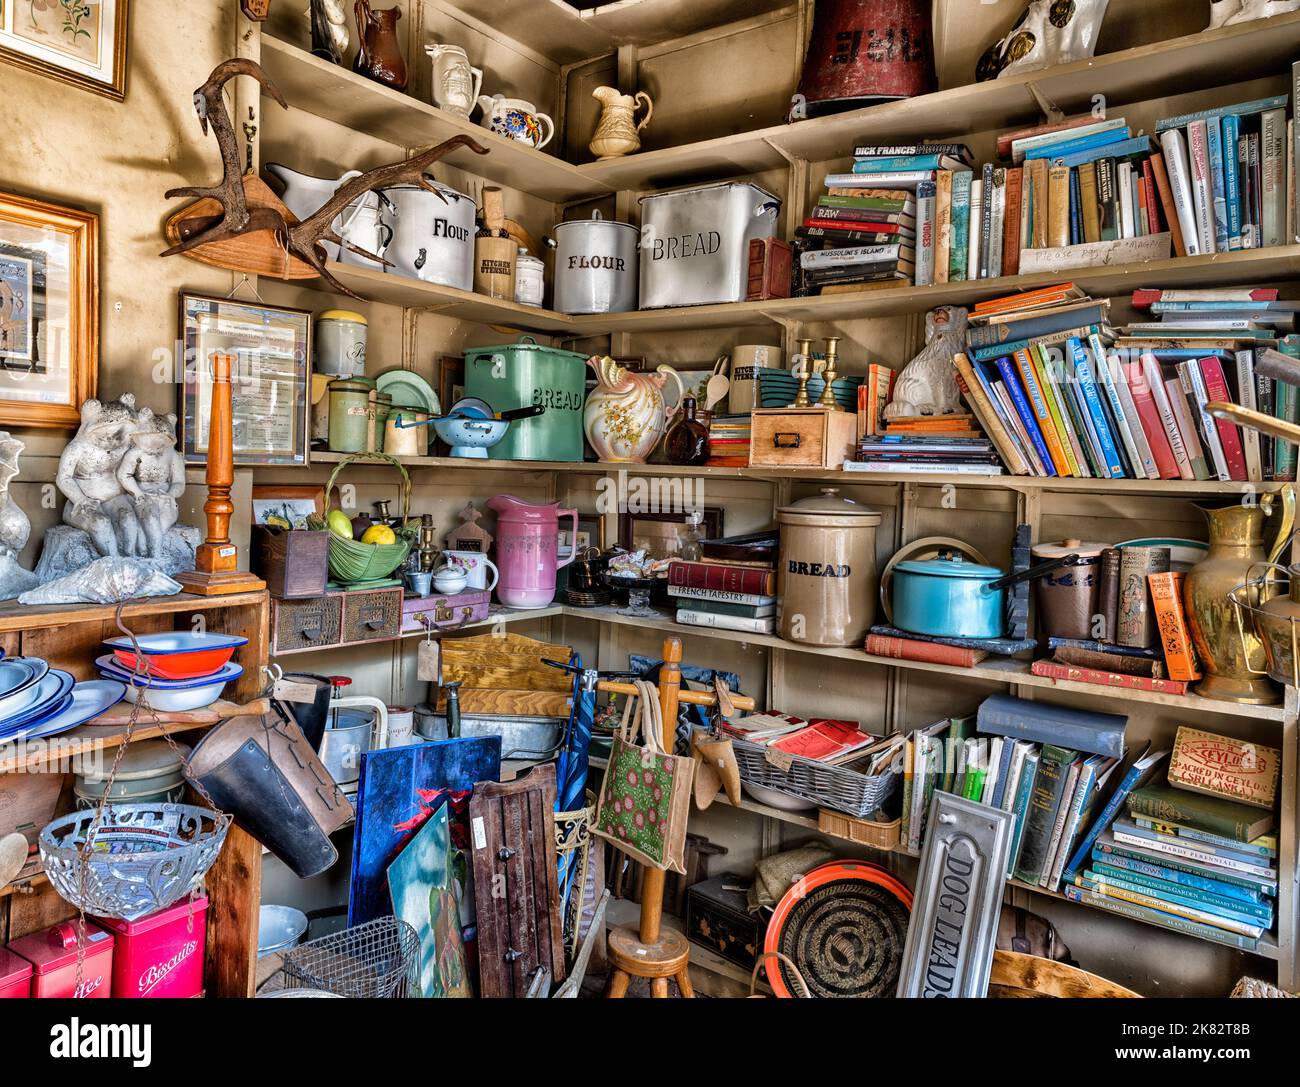 Antiques, collectables and bric-a-brac items on display for sale in an antique shop. Stock Photo